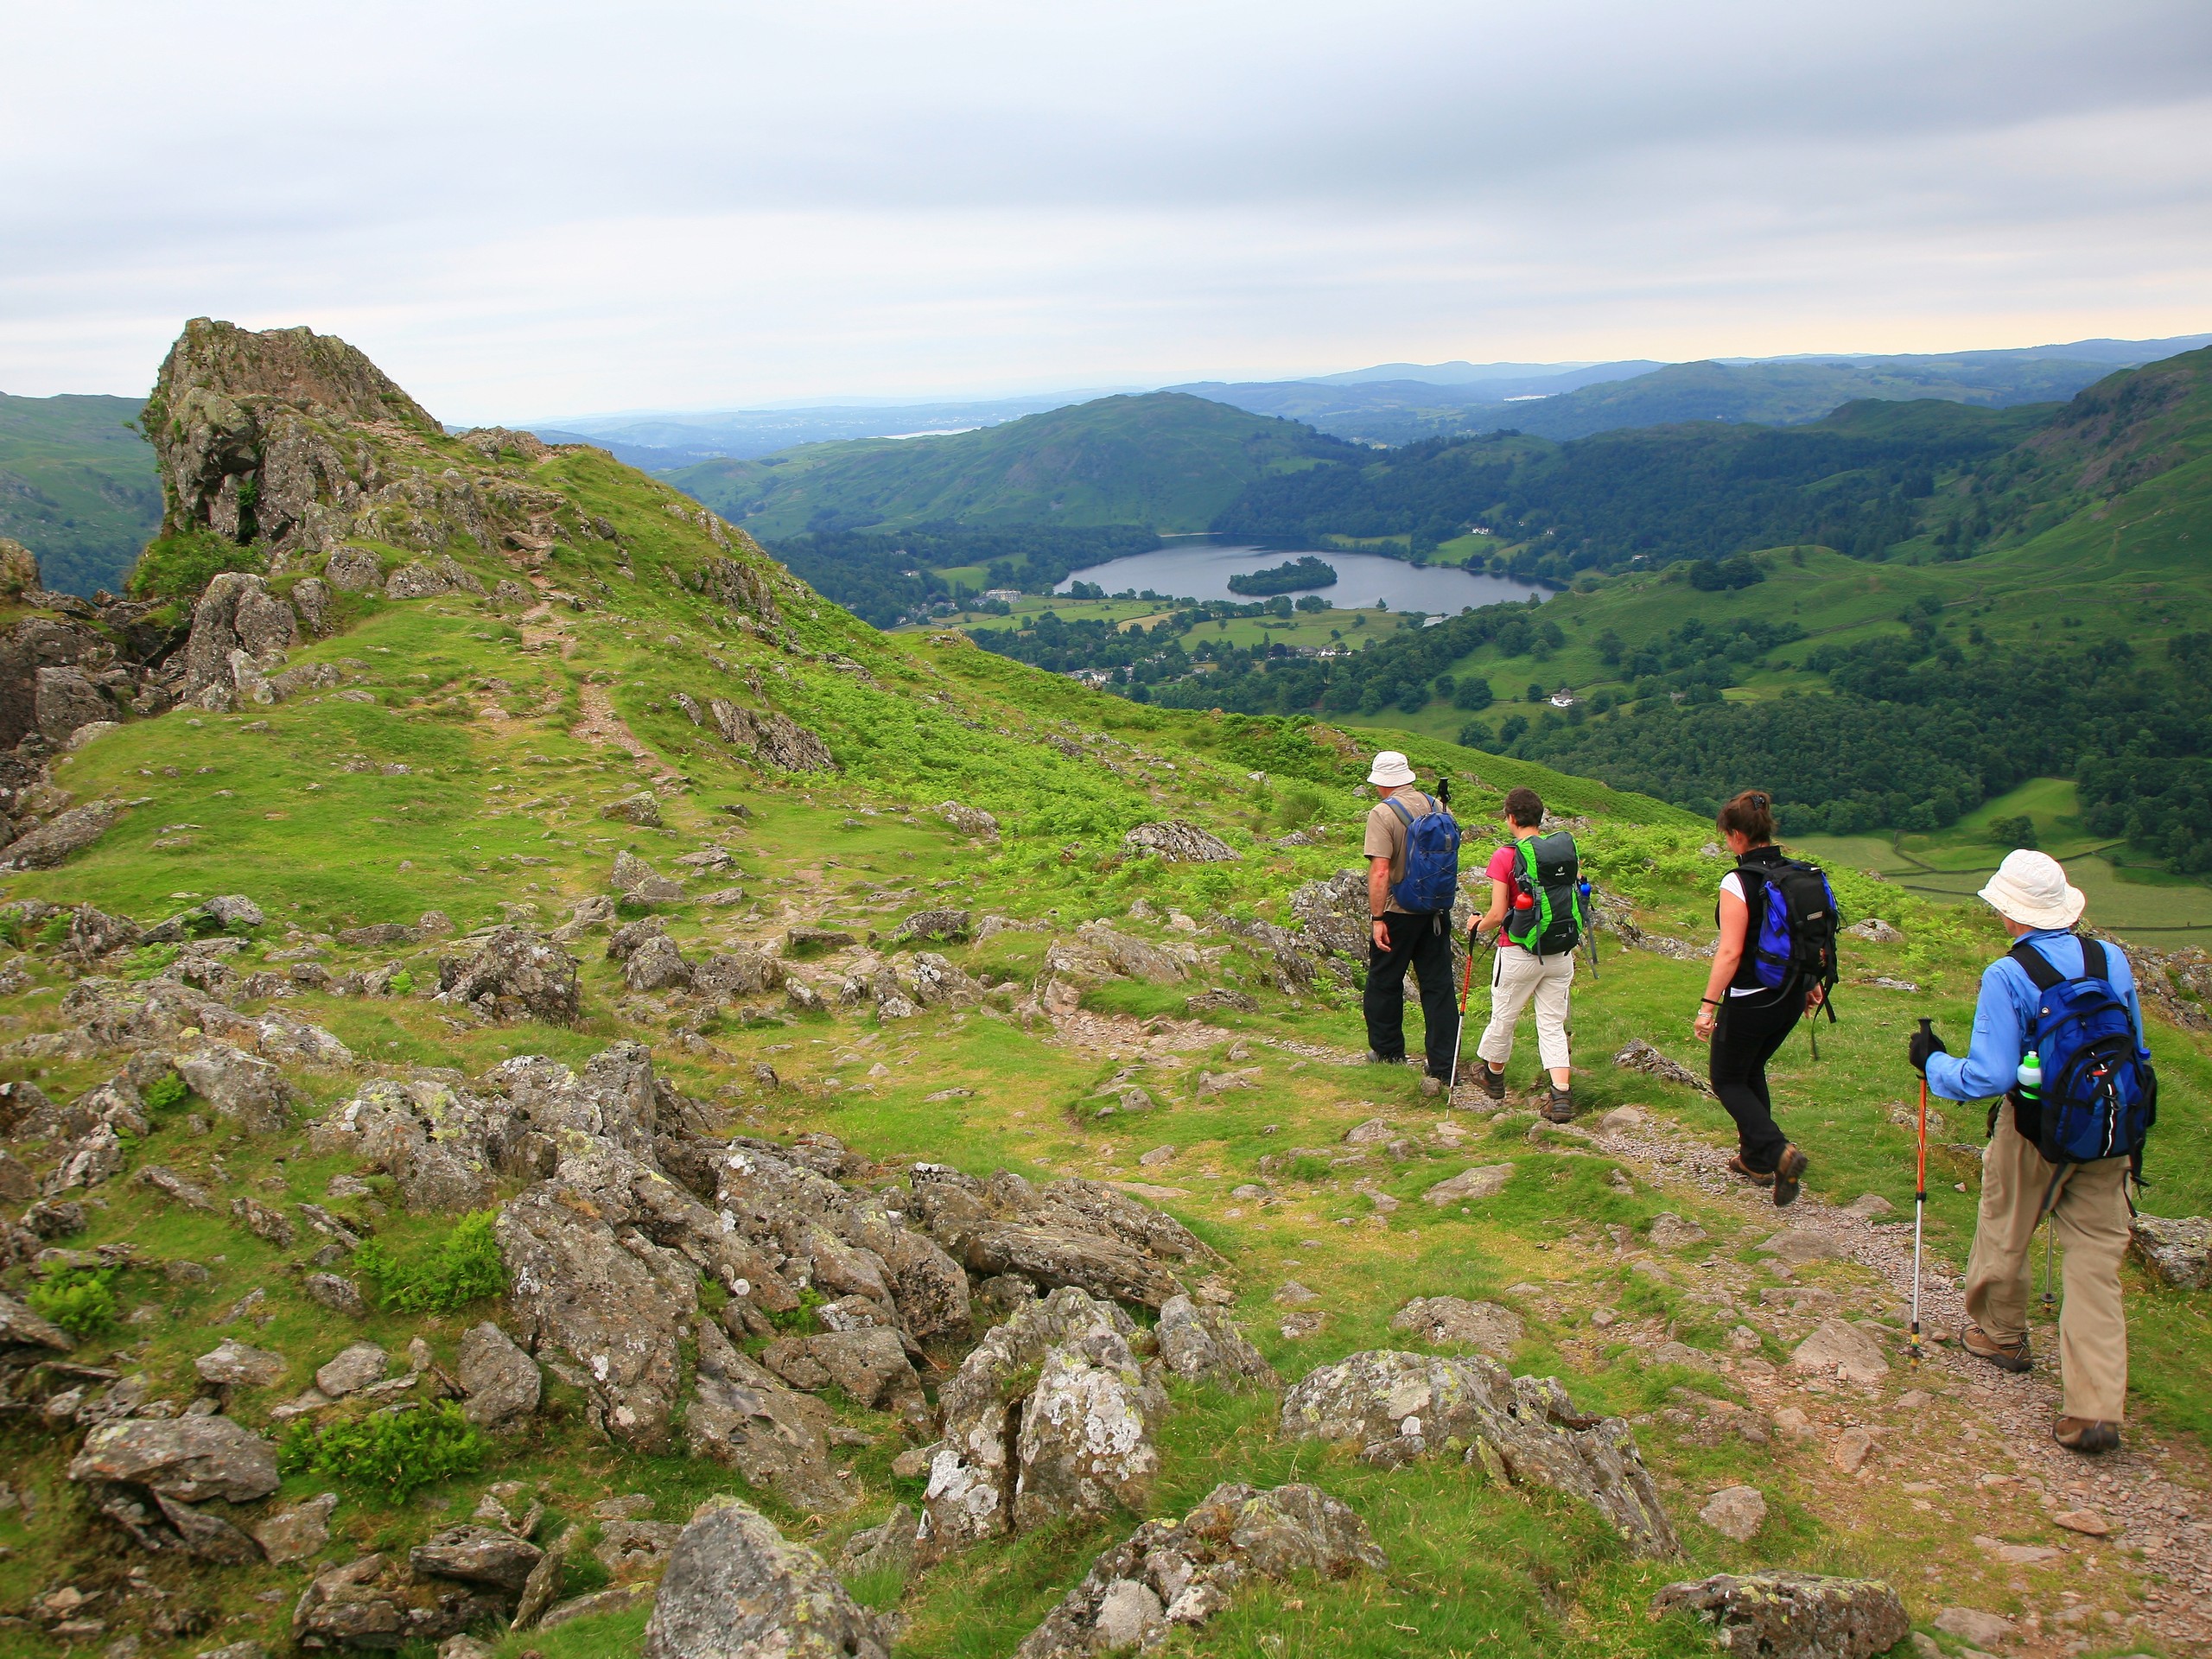 Group of walkers on Helm Crag with Grasmere lake in the background (c)John Millen